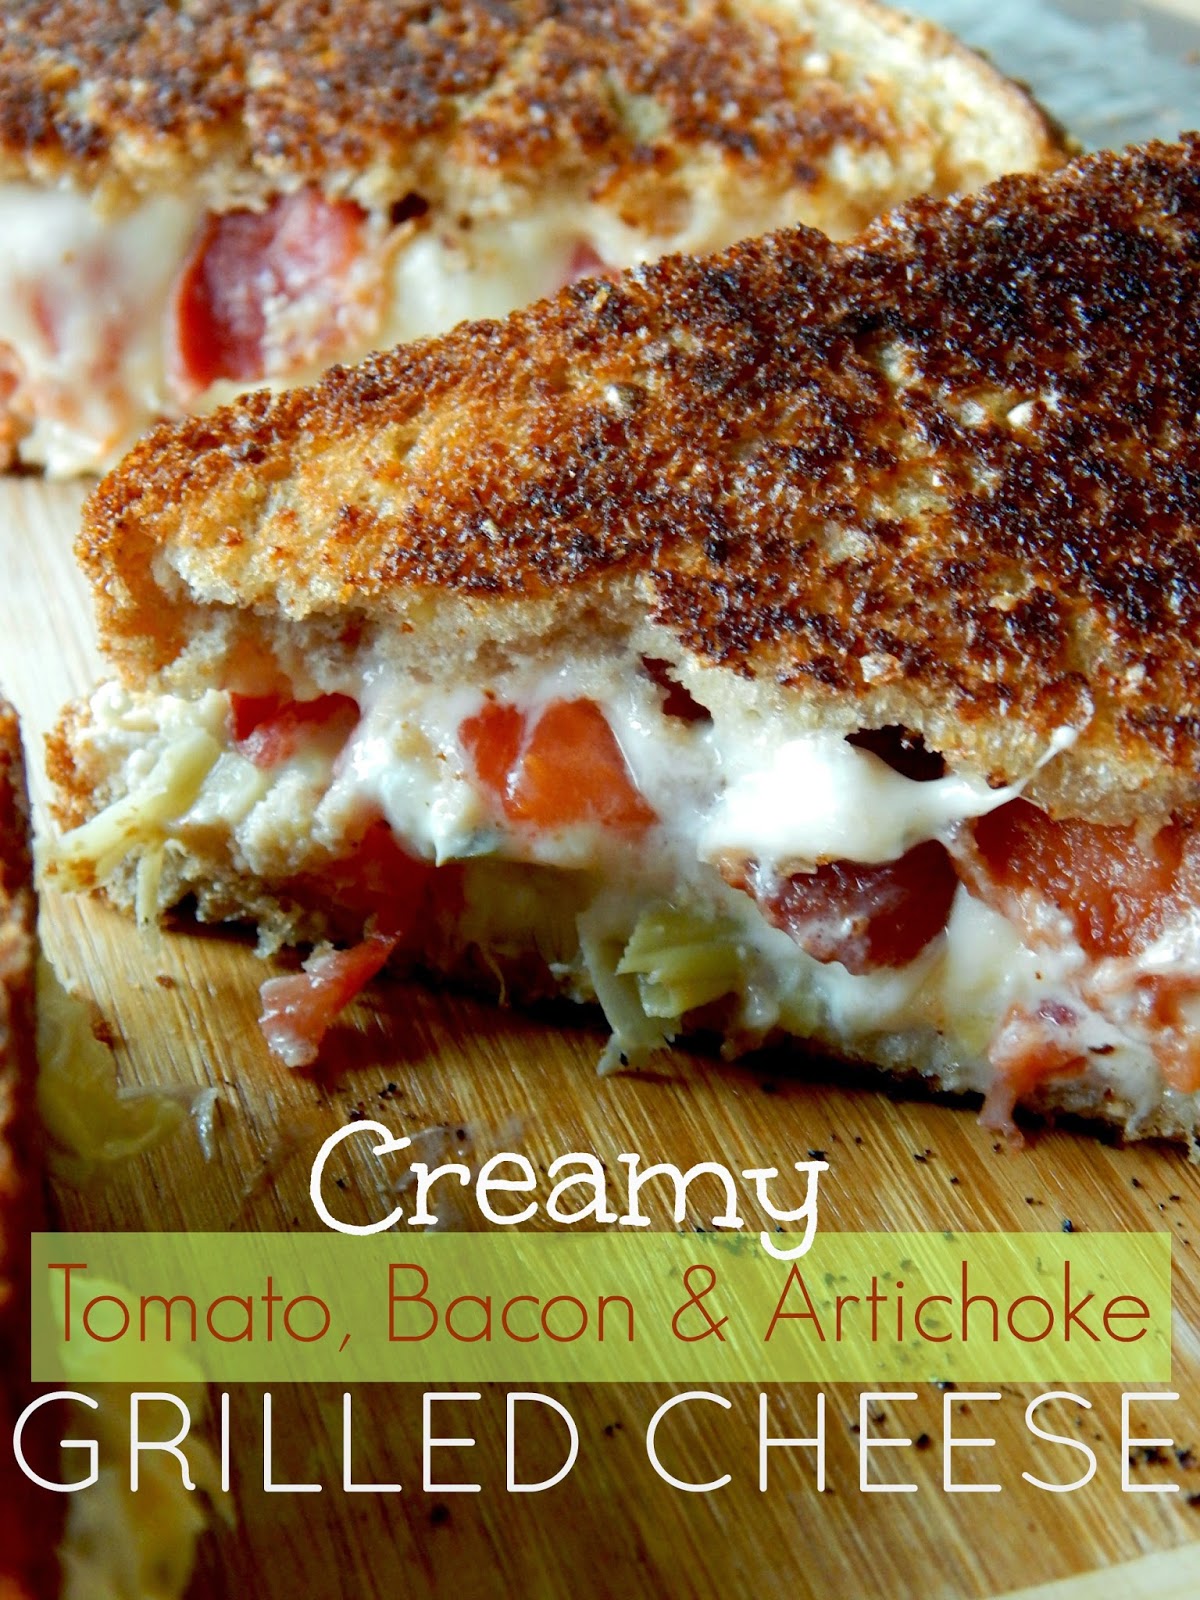 Creamy Tomato, Bacon and Artichoke Grilled Cheese Sandwiches from Ally's Sweet and Savory Eats